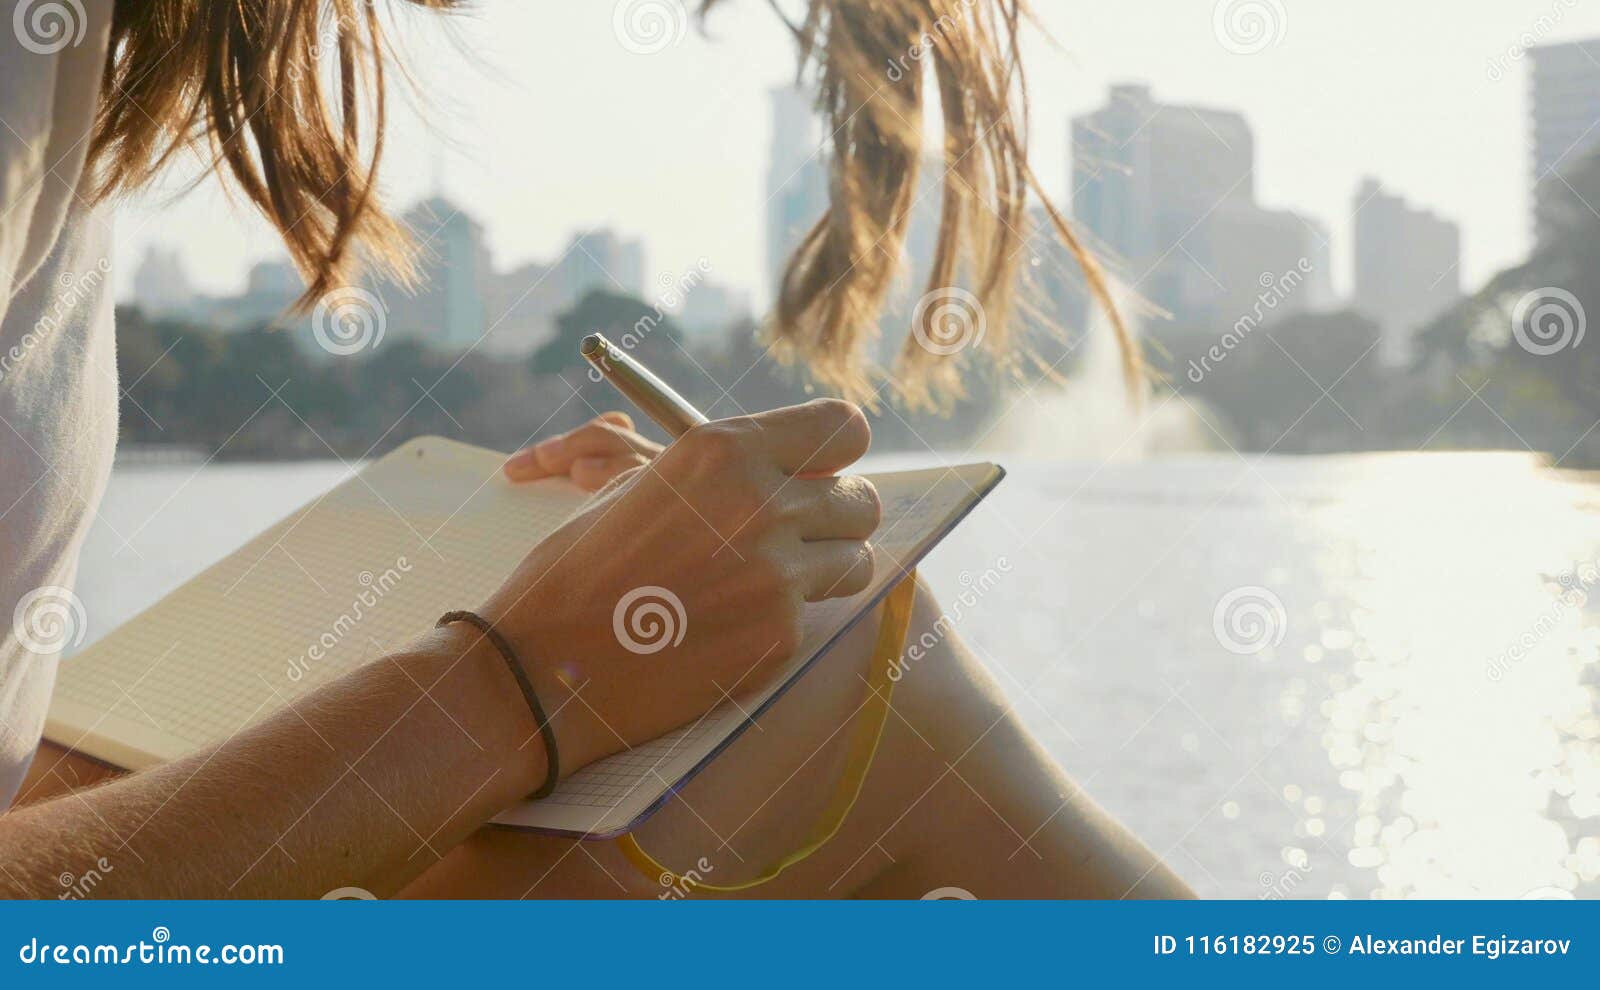 young woman sitting on the bench in park and writing in diary, close-up